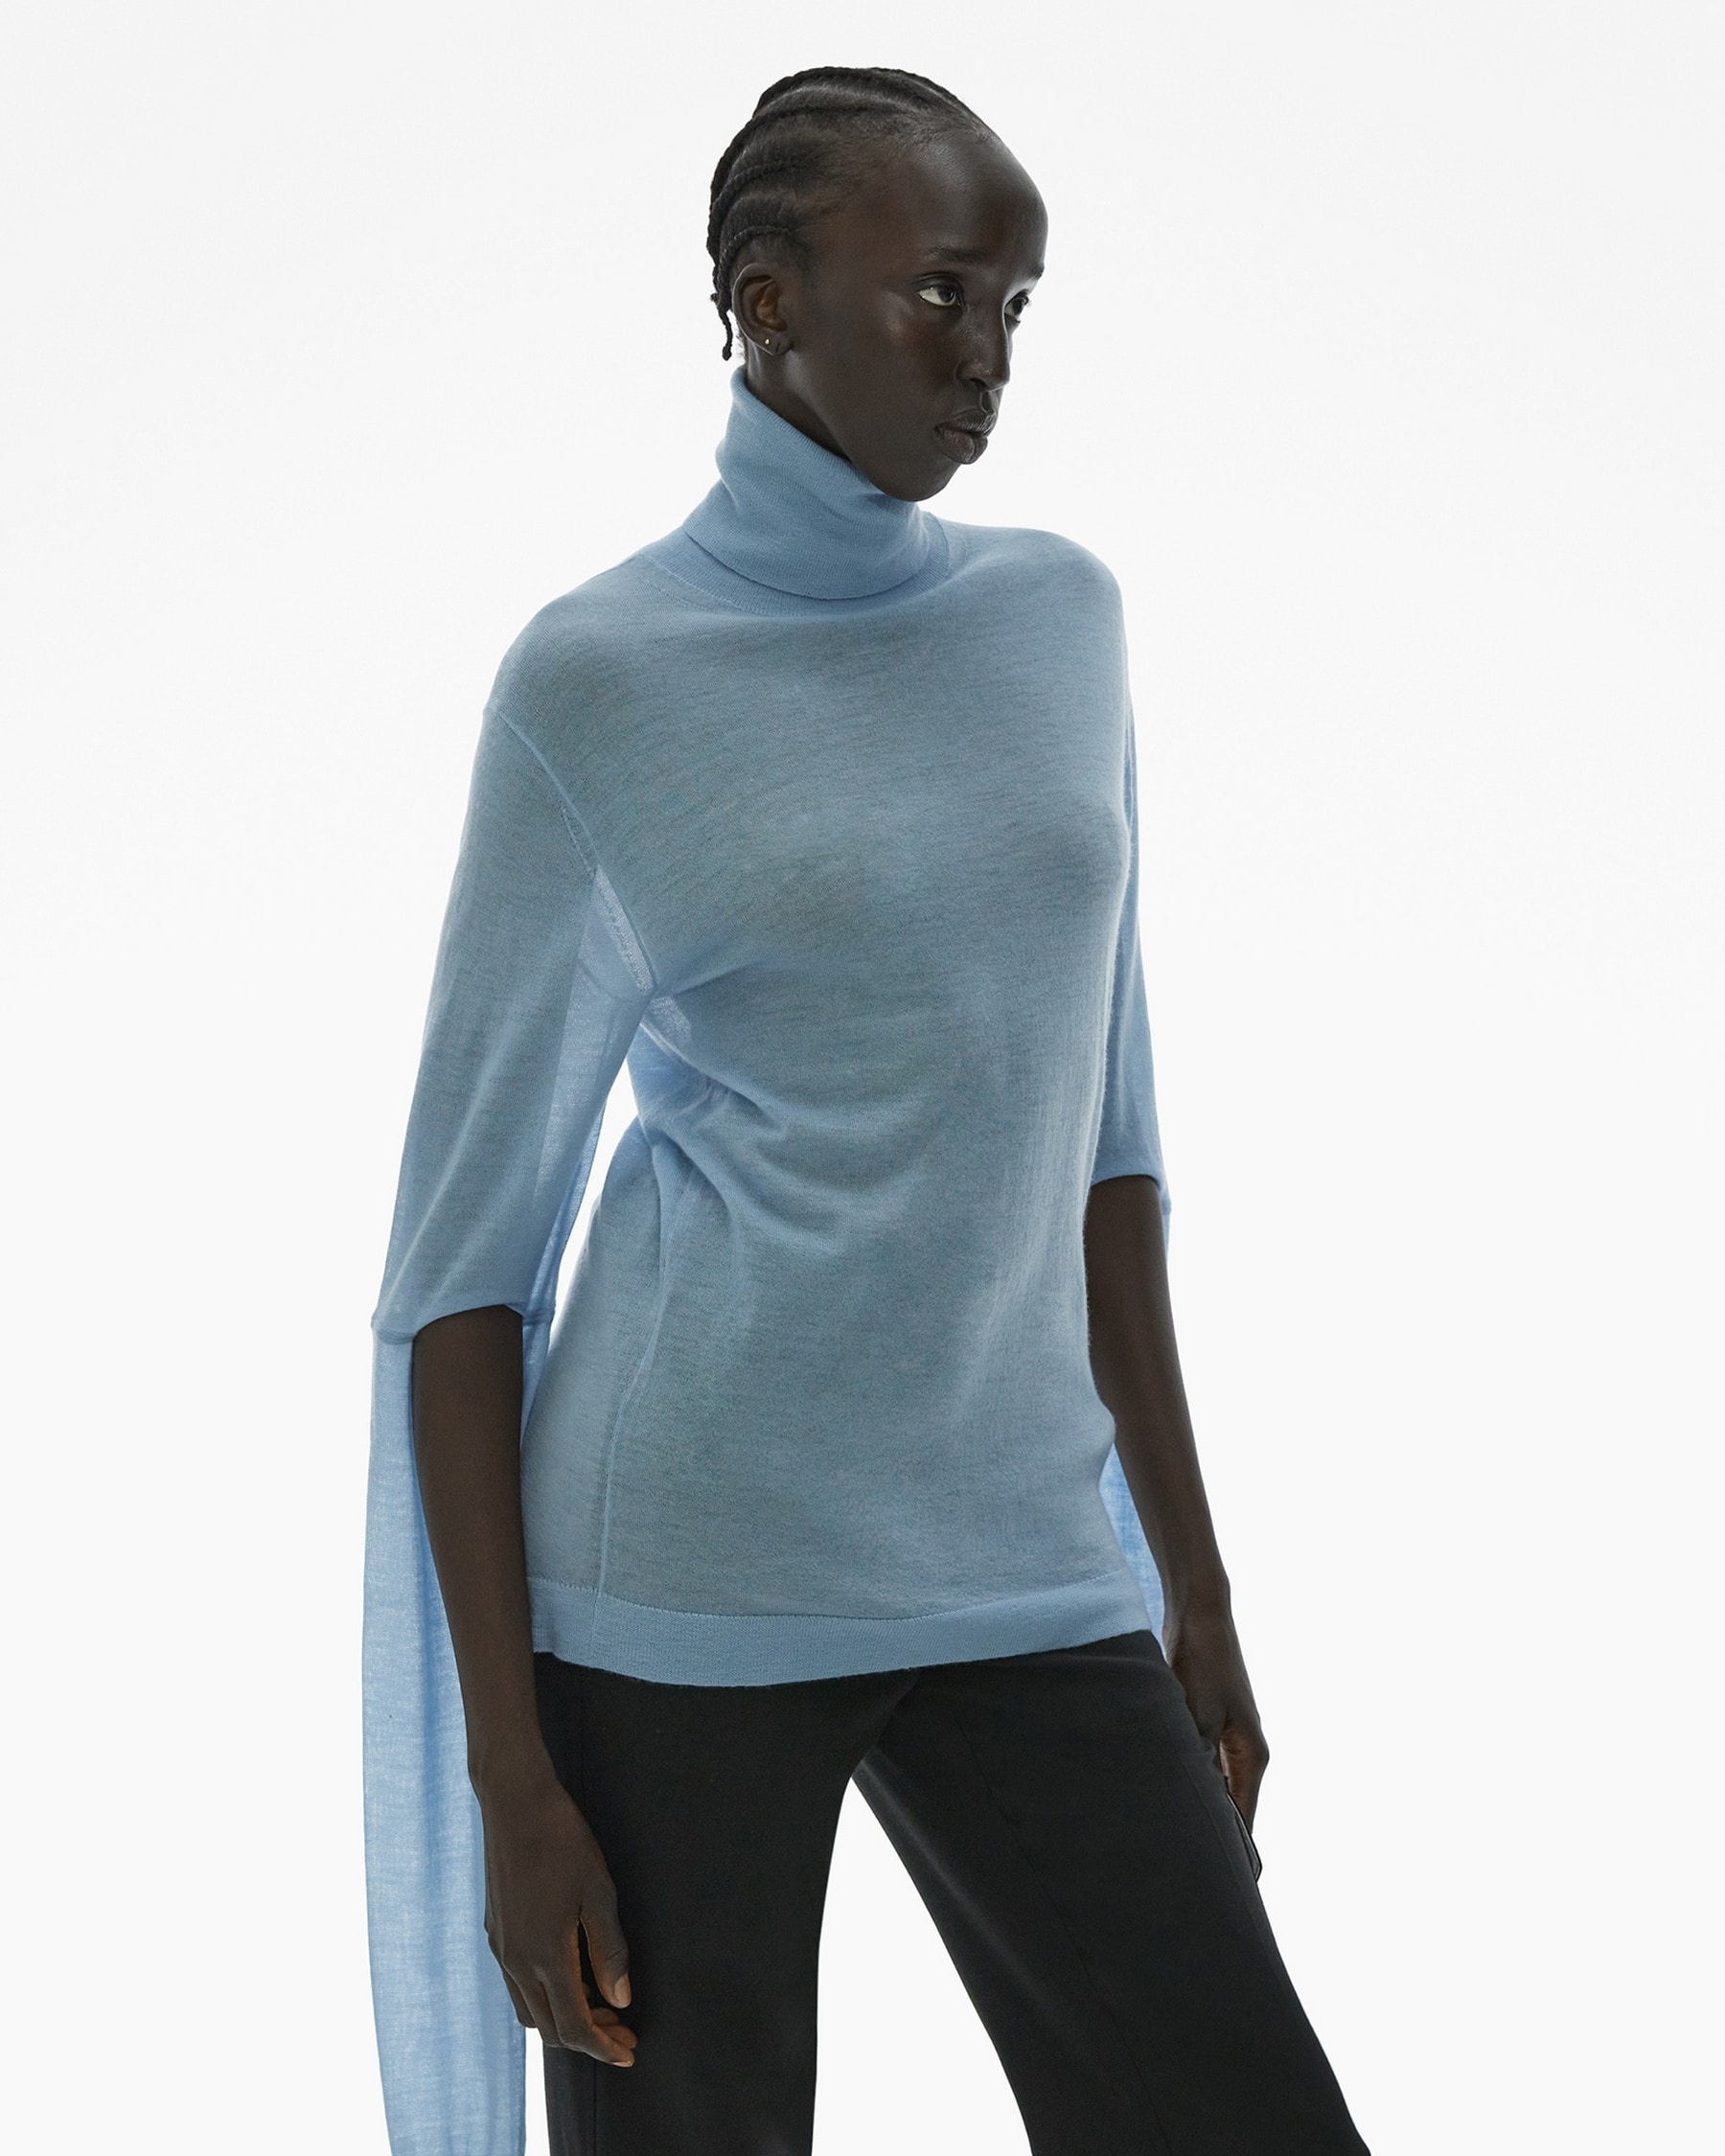 CUT-OUT TURTLENECK SWEATER - 5